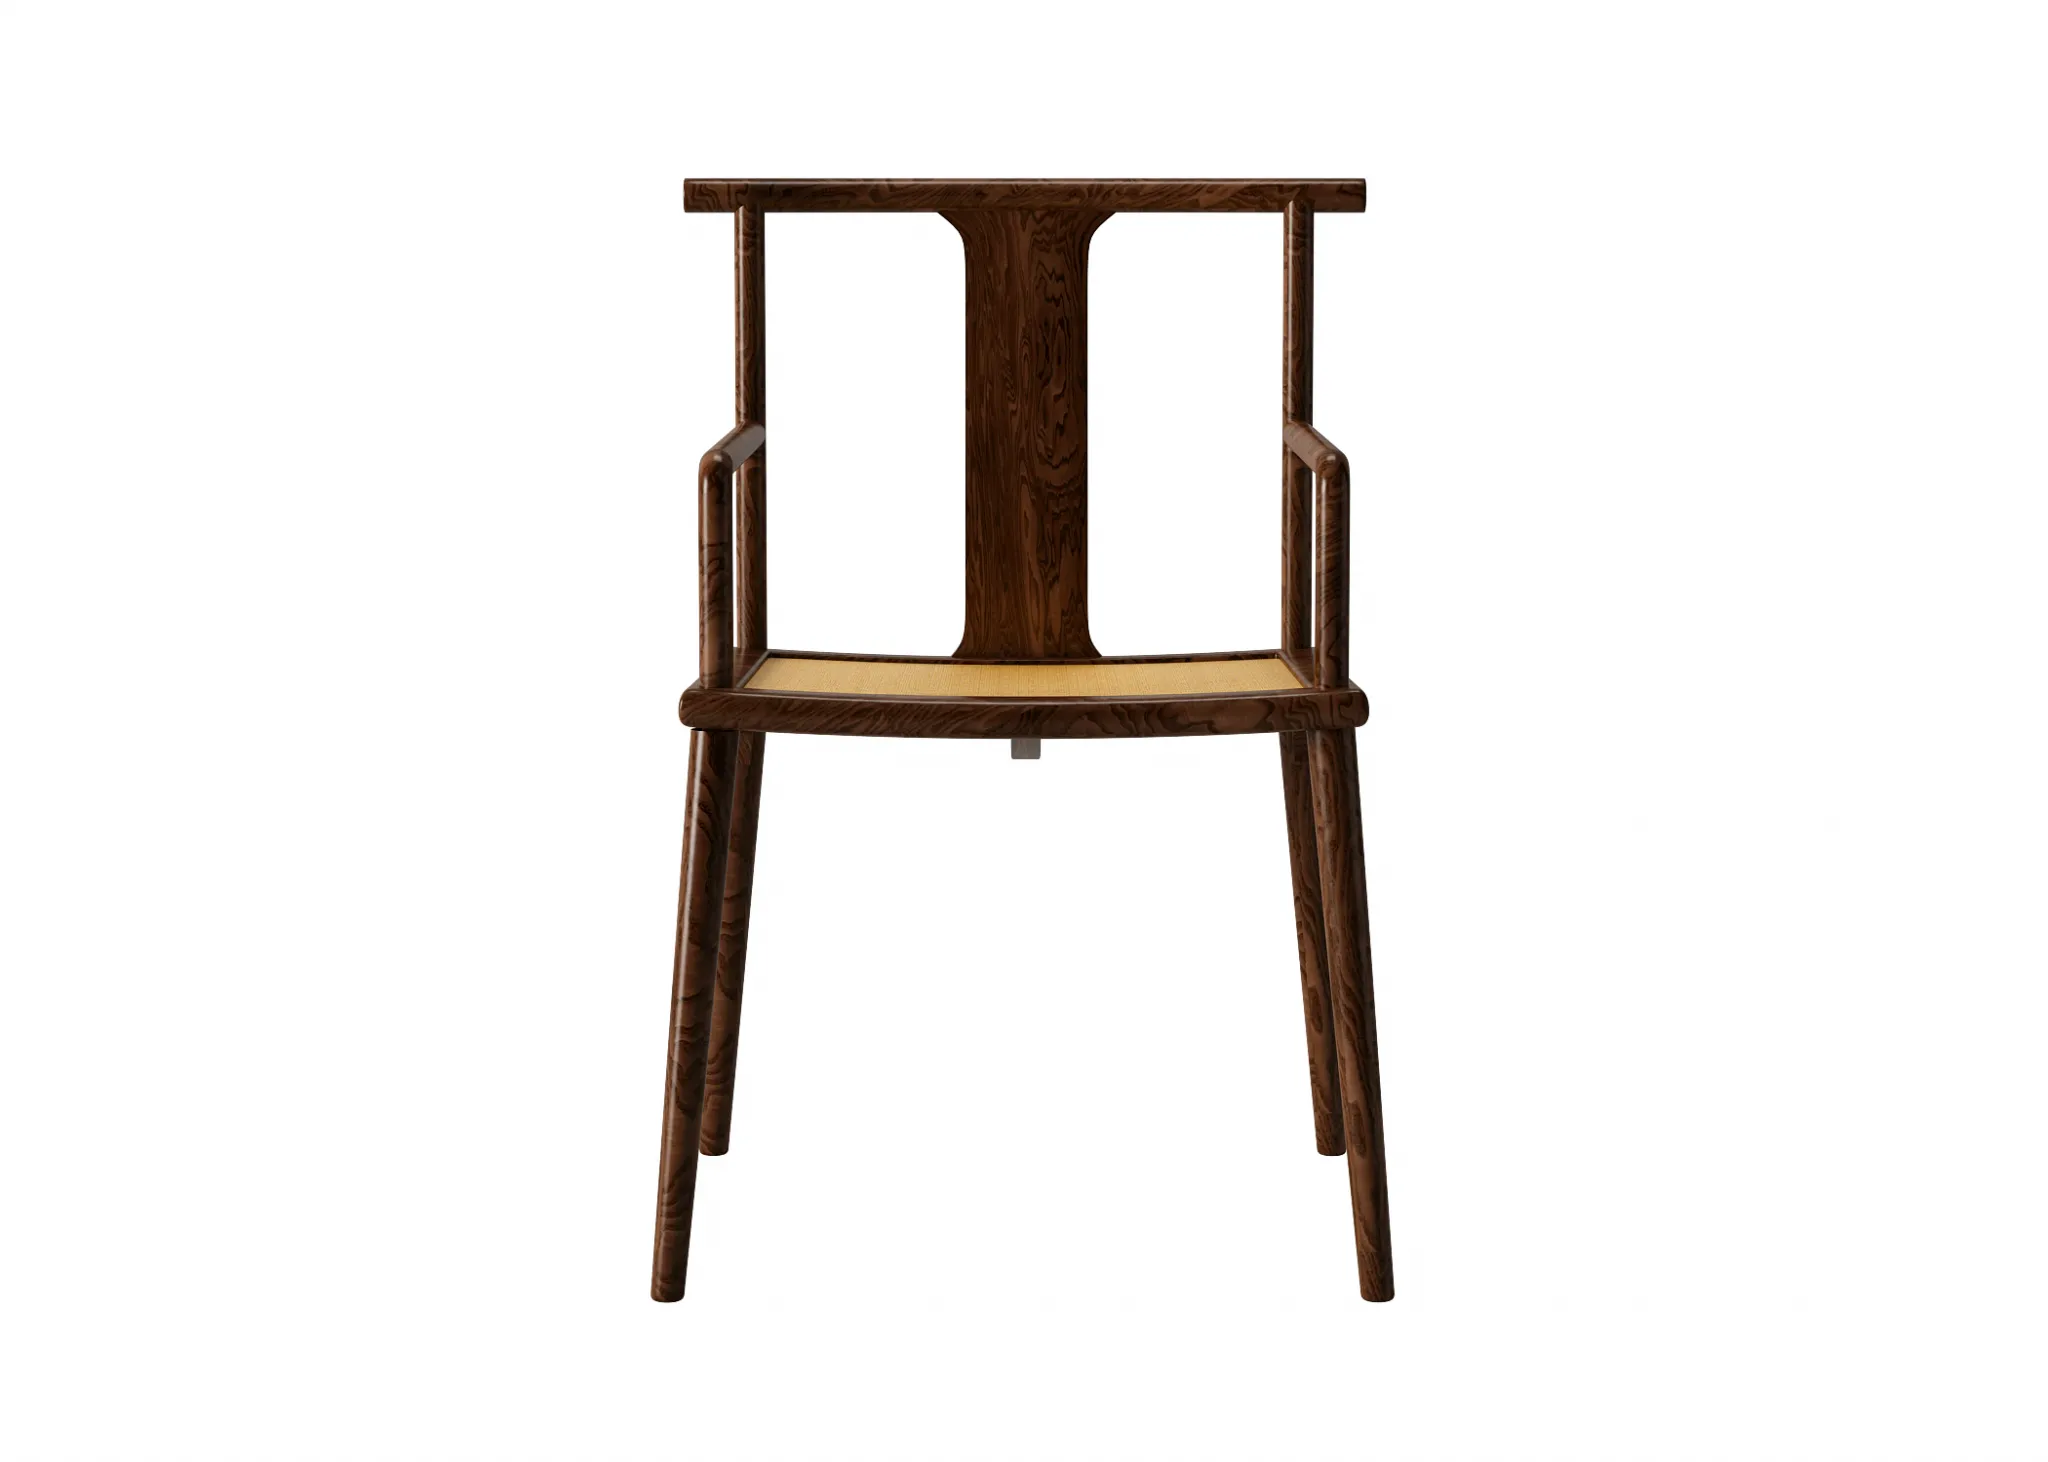 FURNITURE 3D MODELS – CHAIRS – 0474